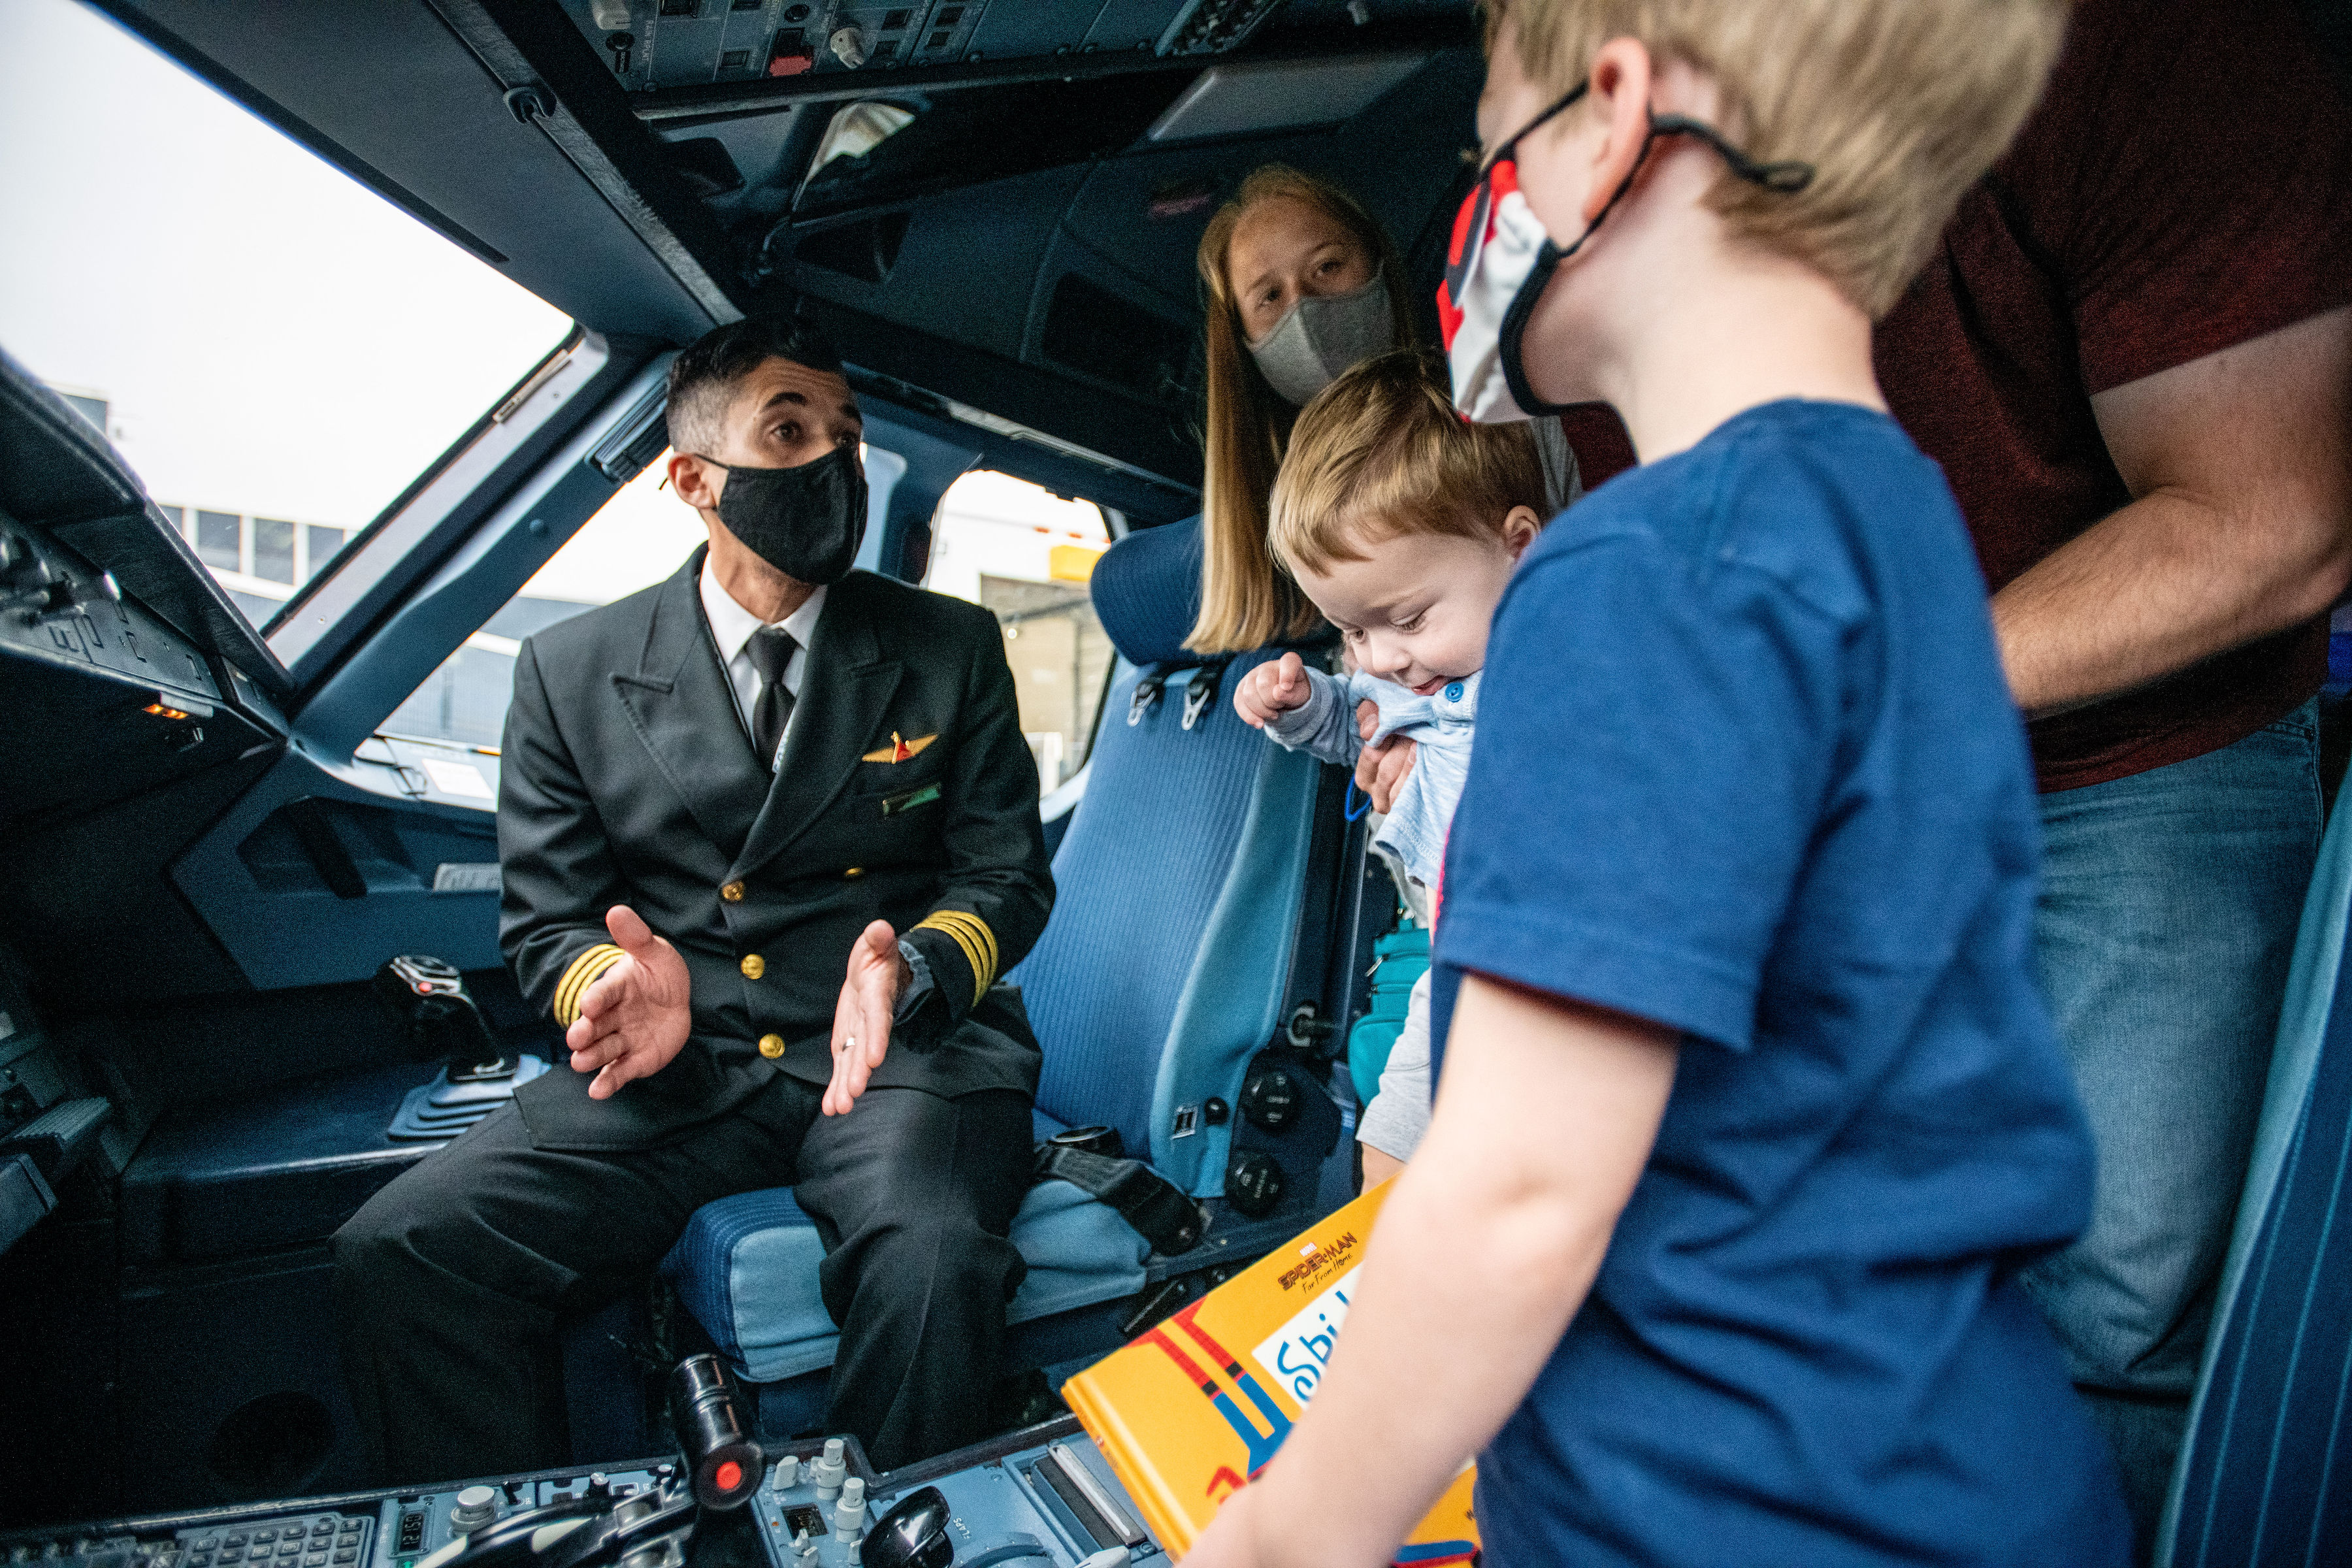 Customer and their children who participate in the Navigating MSP tour are able to explore different parts of the plane to feel comfortable with the fly process.